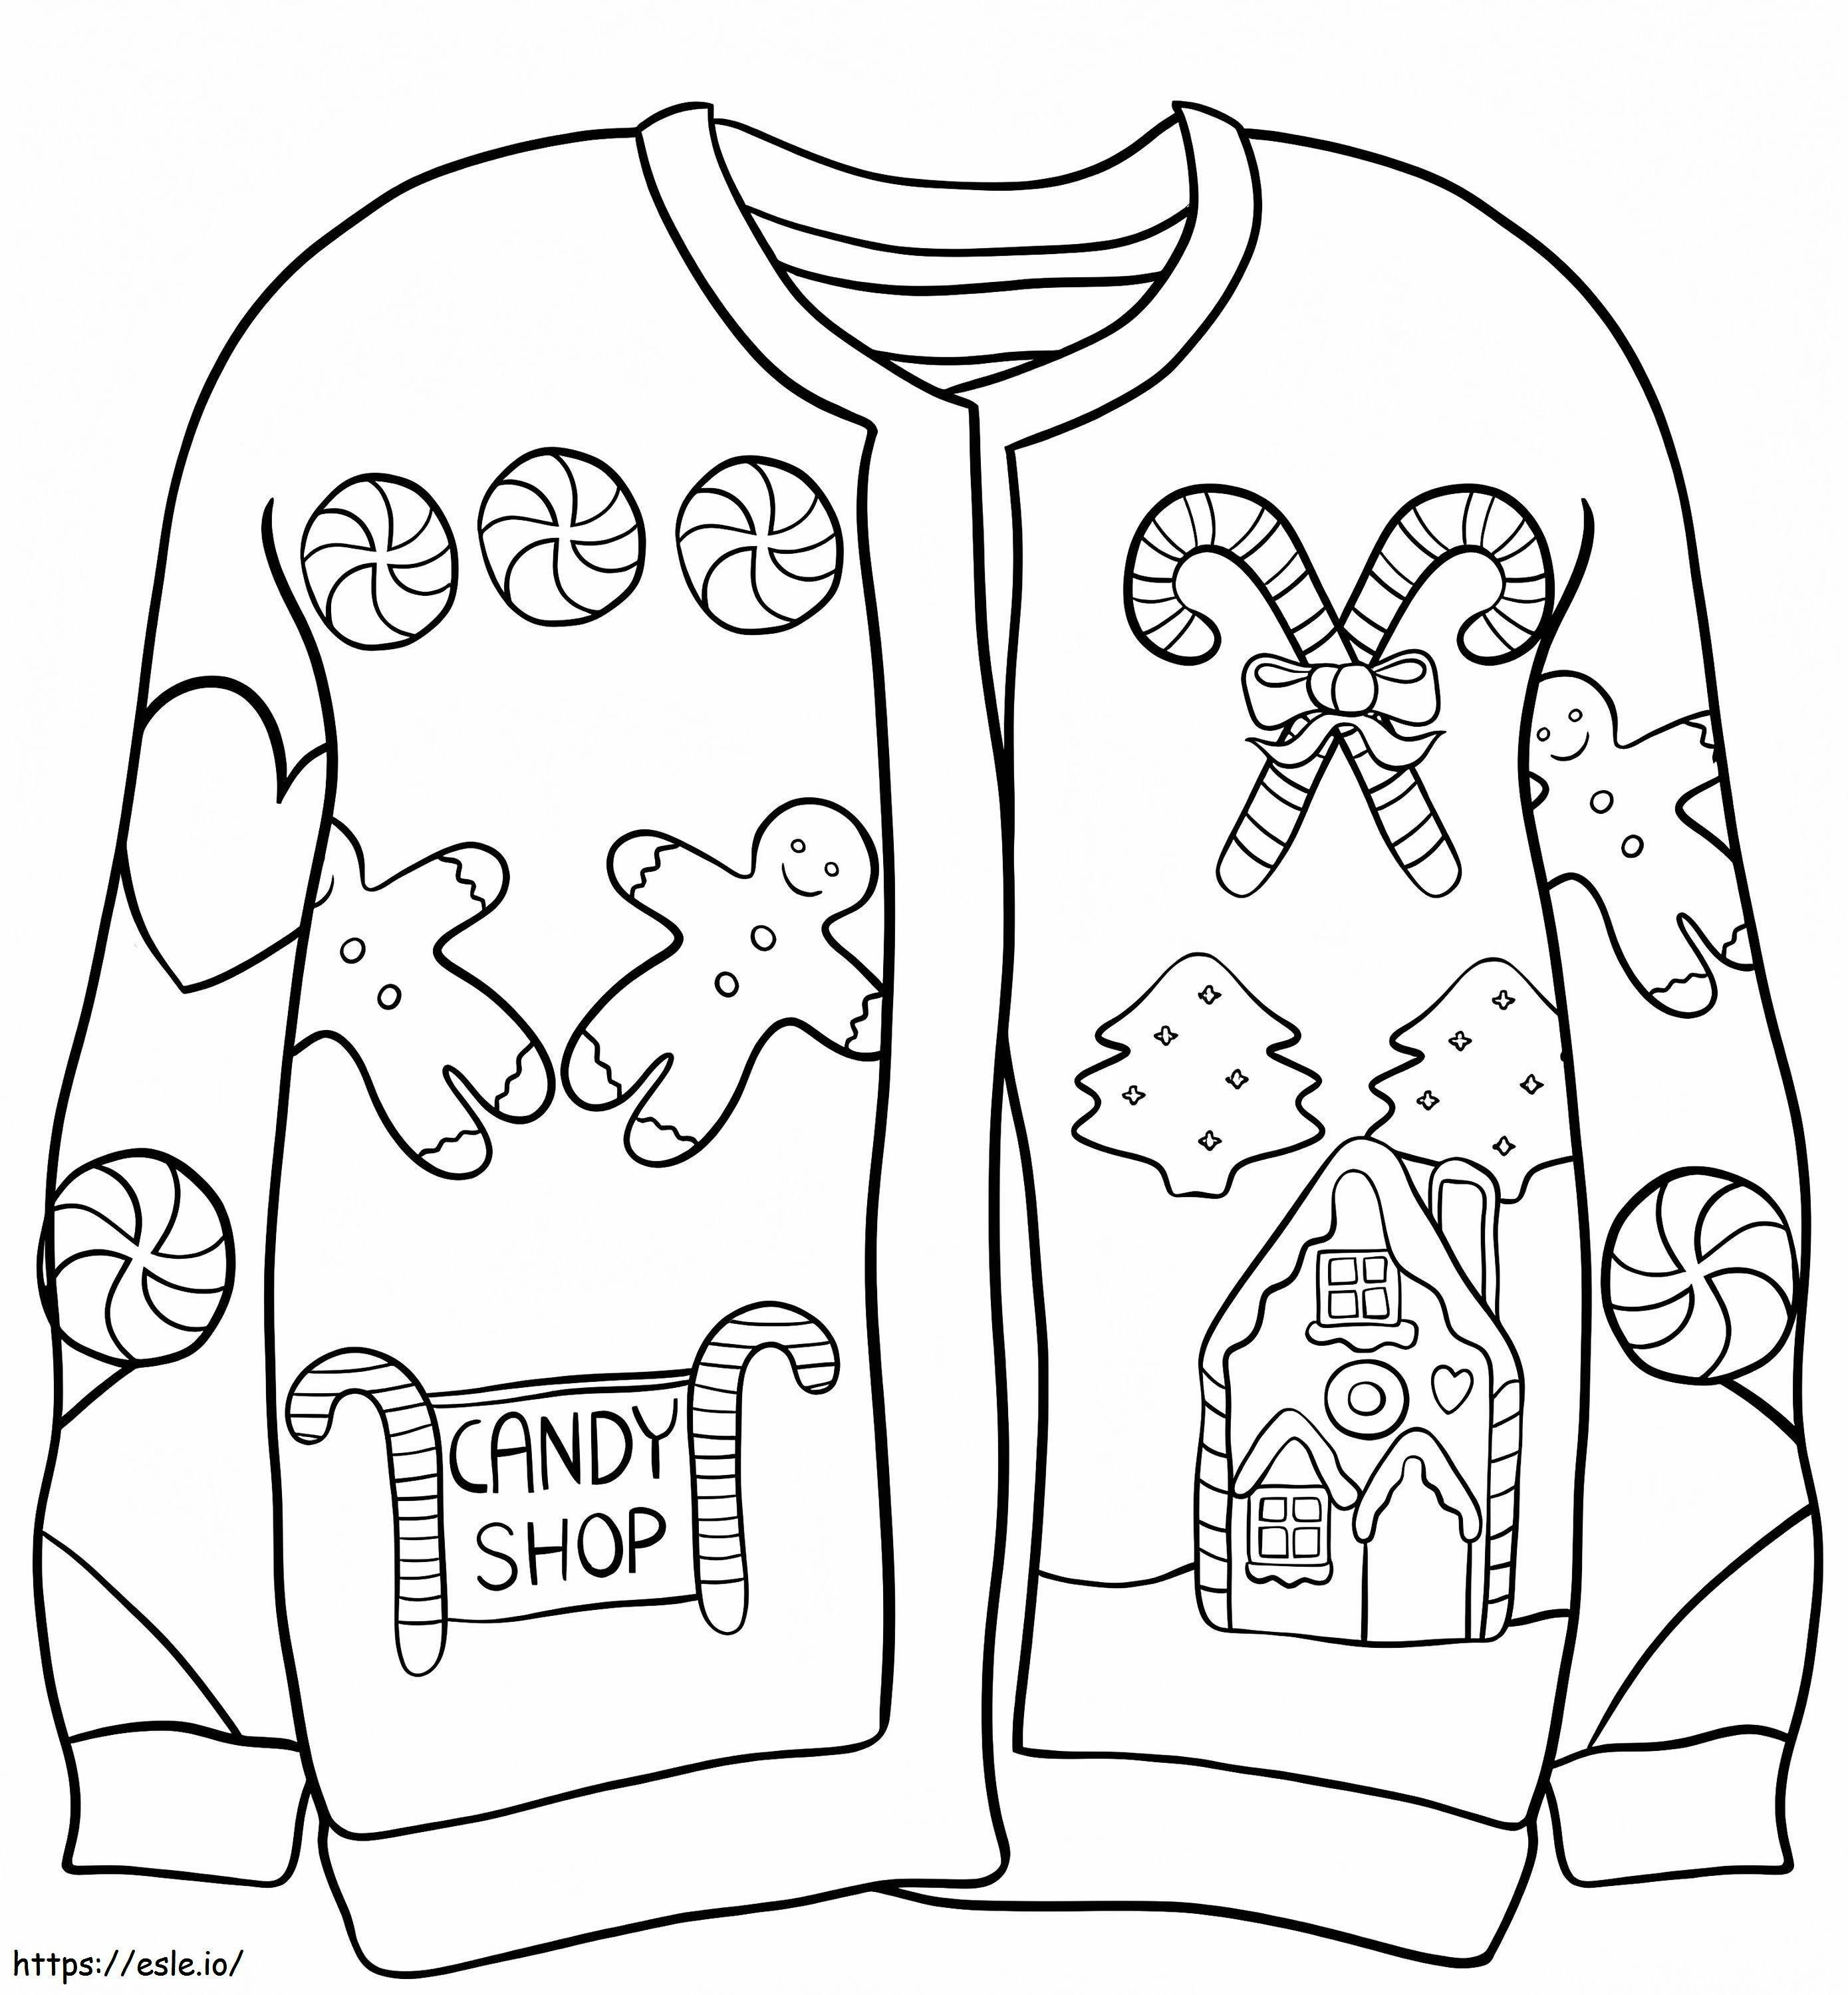 Candy Shop Christmas Sweater coloring page